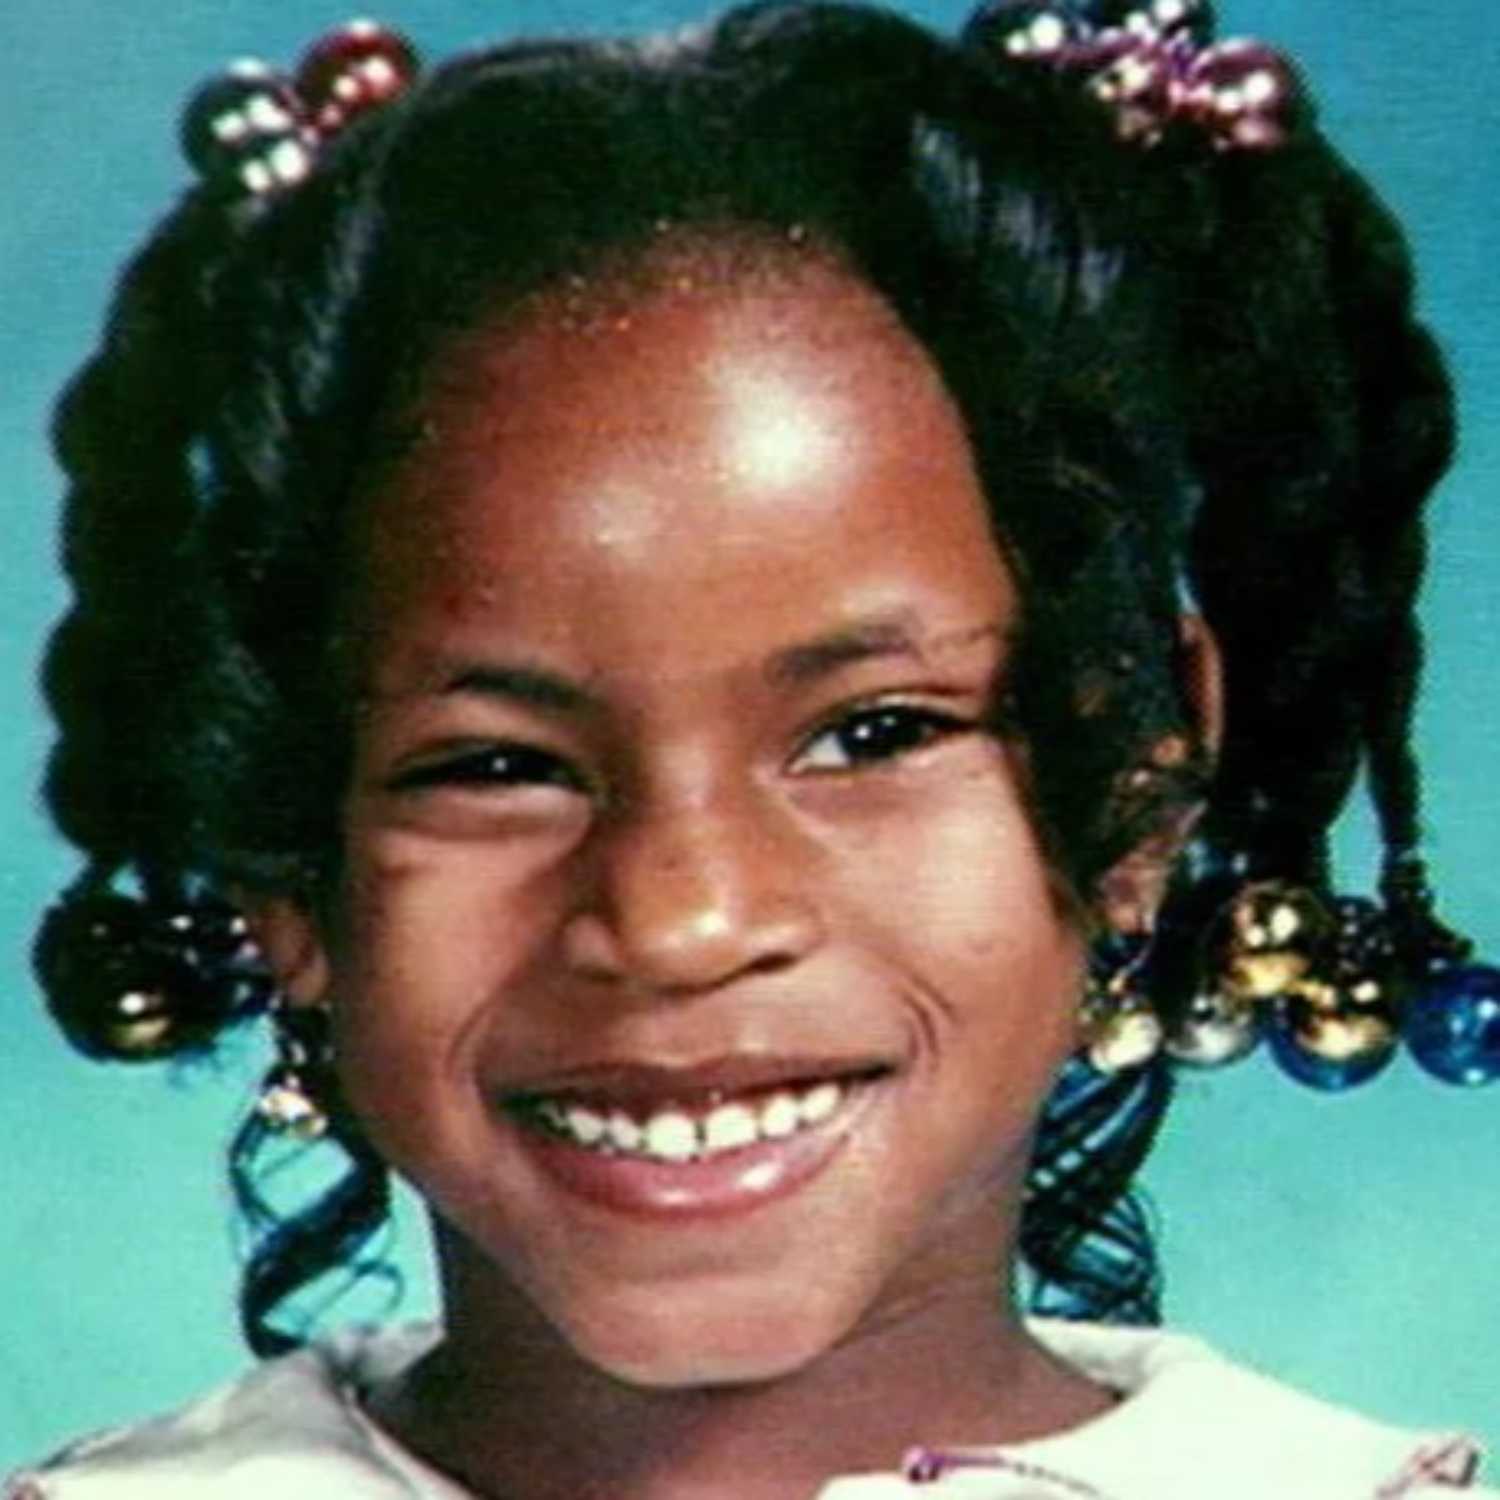 Child Missing for 20 Years?- The Unsolved Disappearance of Alexis Patterson